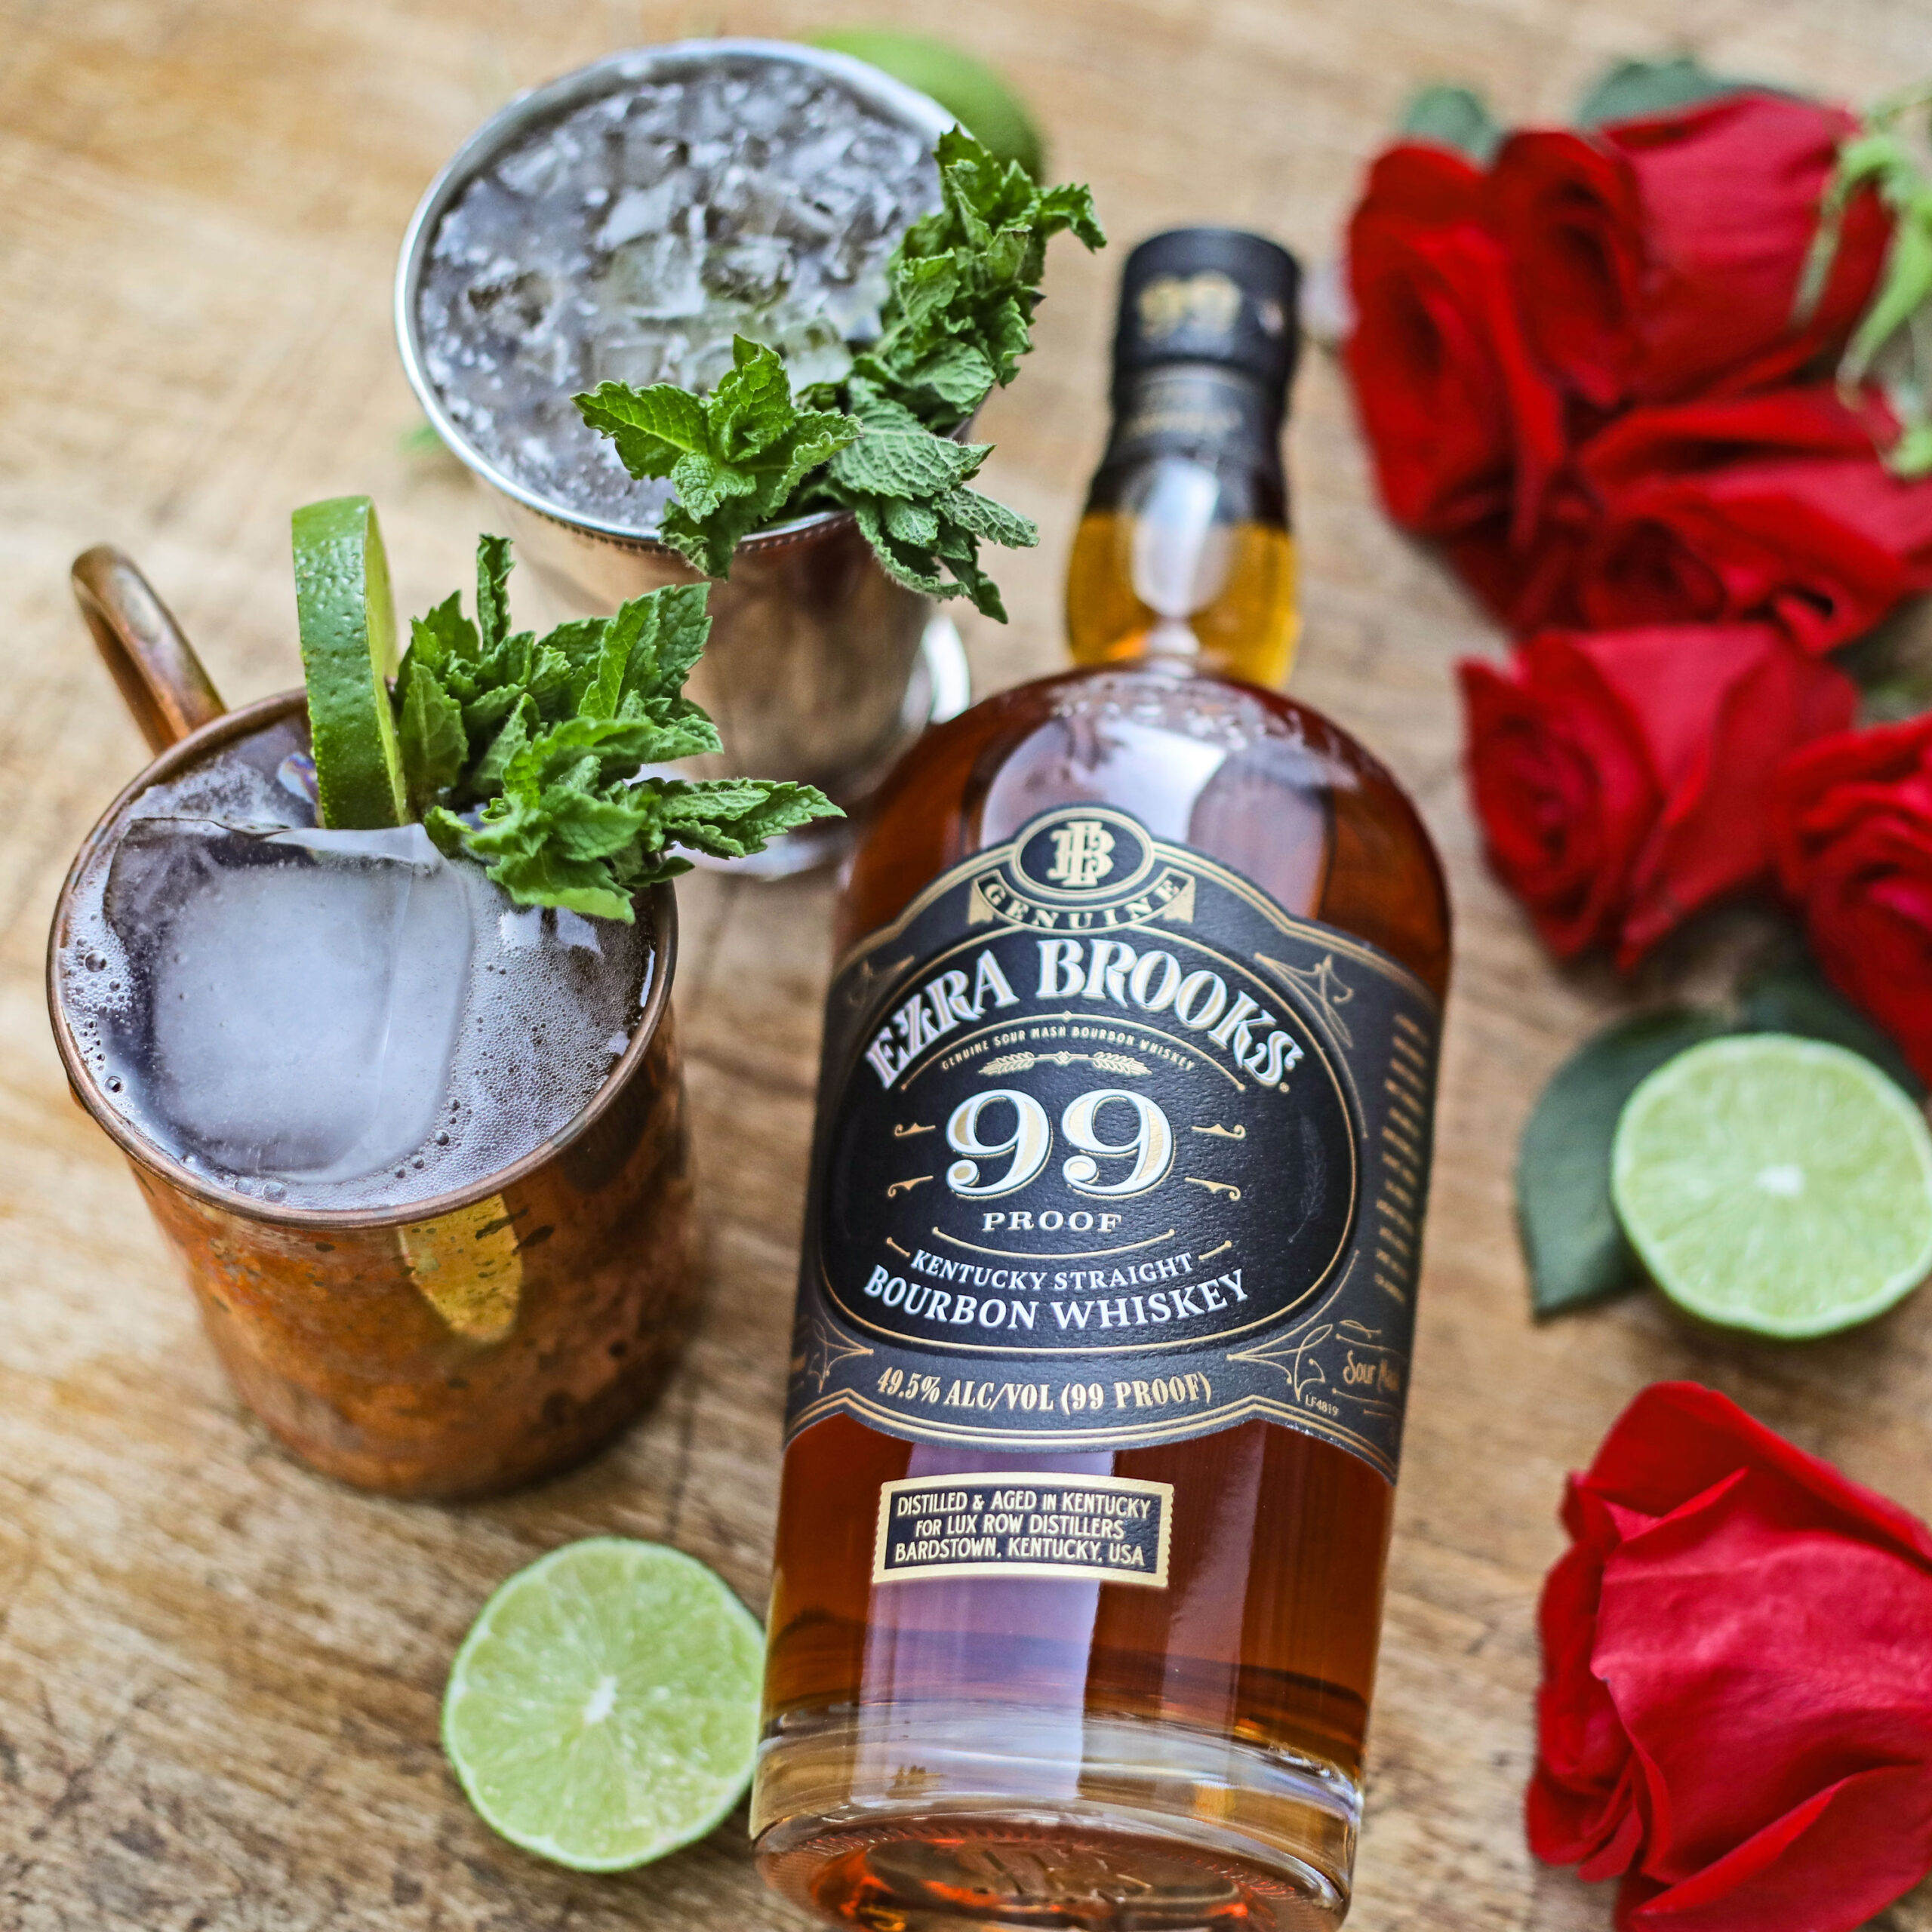 A bottle of Ezra Brooks 99 next to a mint julep cocktail and roses